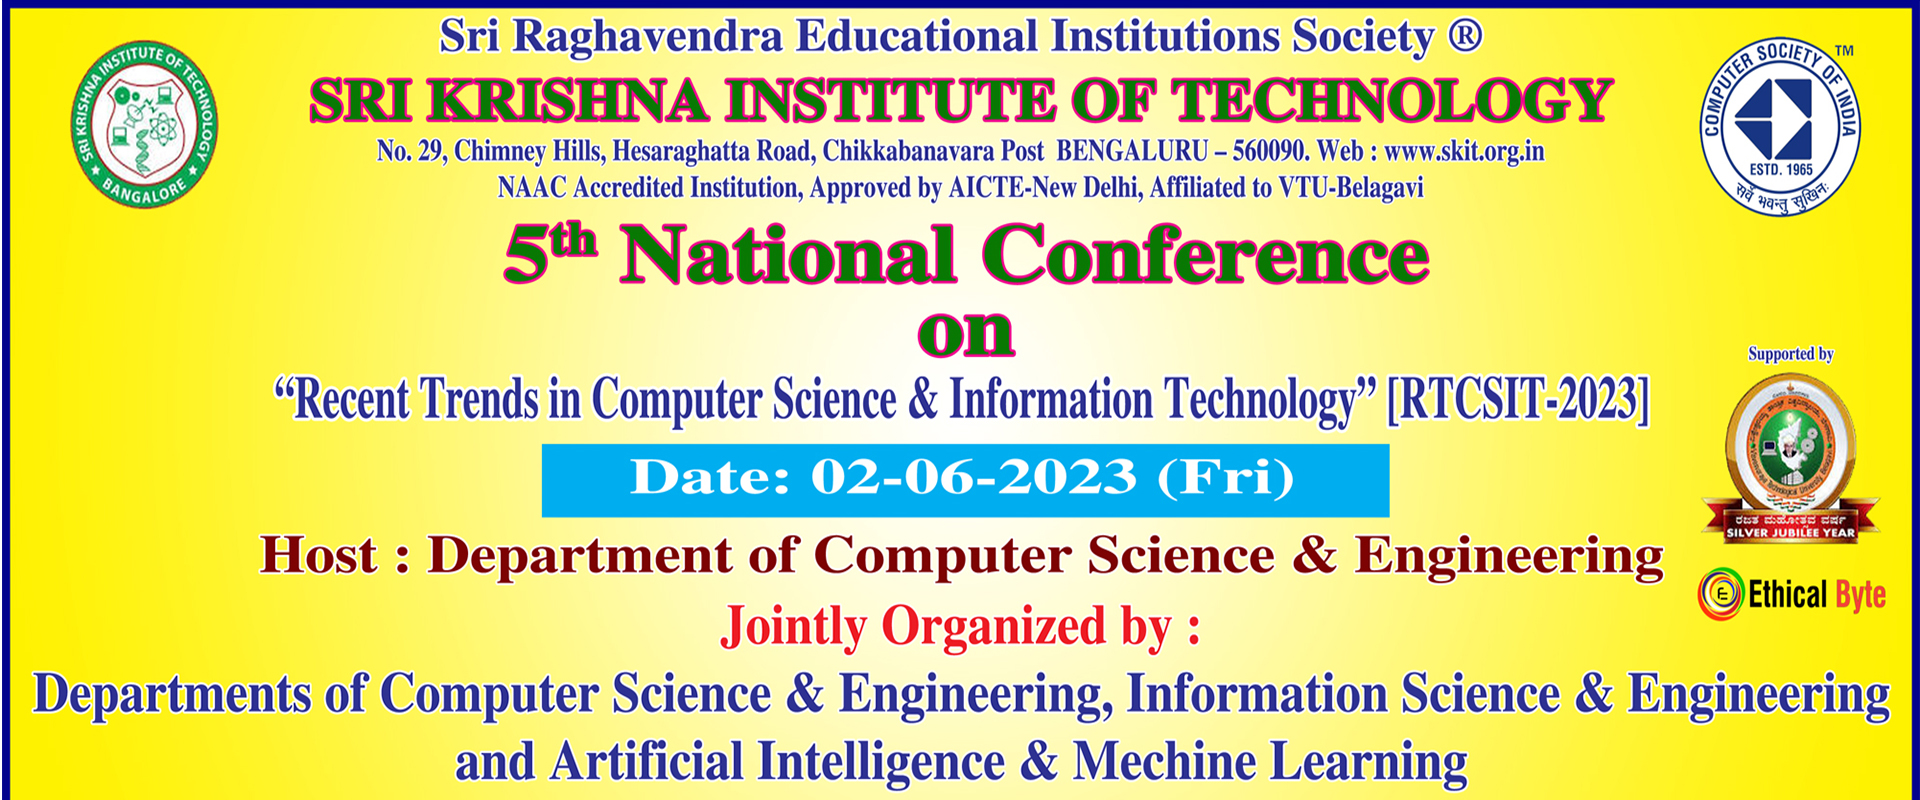 5th National Conference RTCSIT-2023